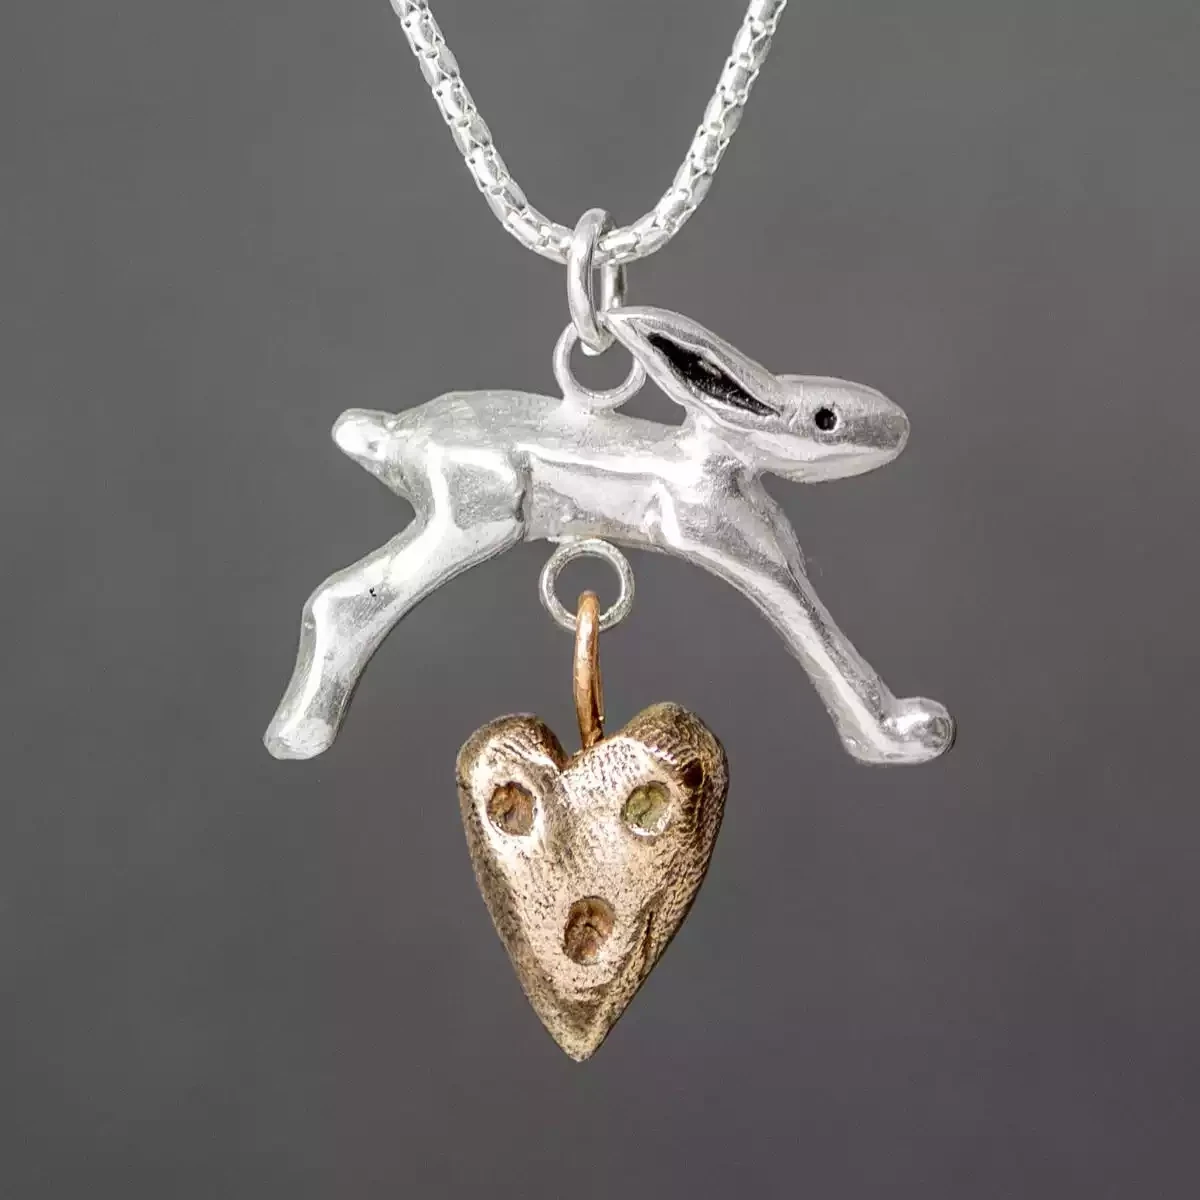 Hare and Heart Silver and Bronze Pendant by Xuella Arnold